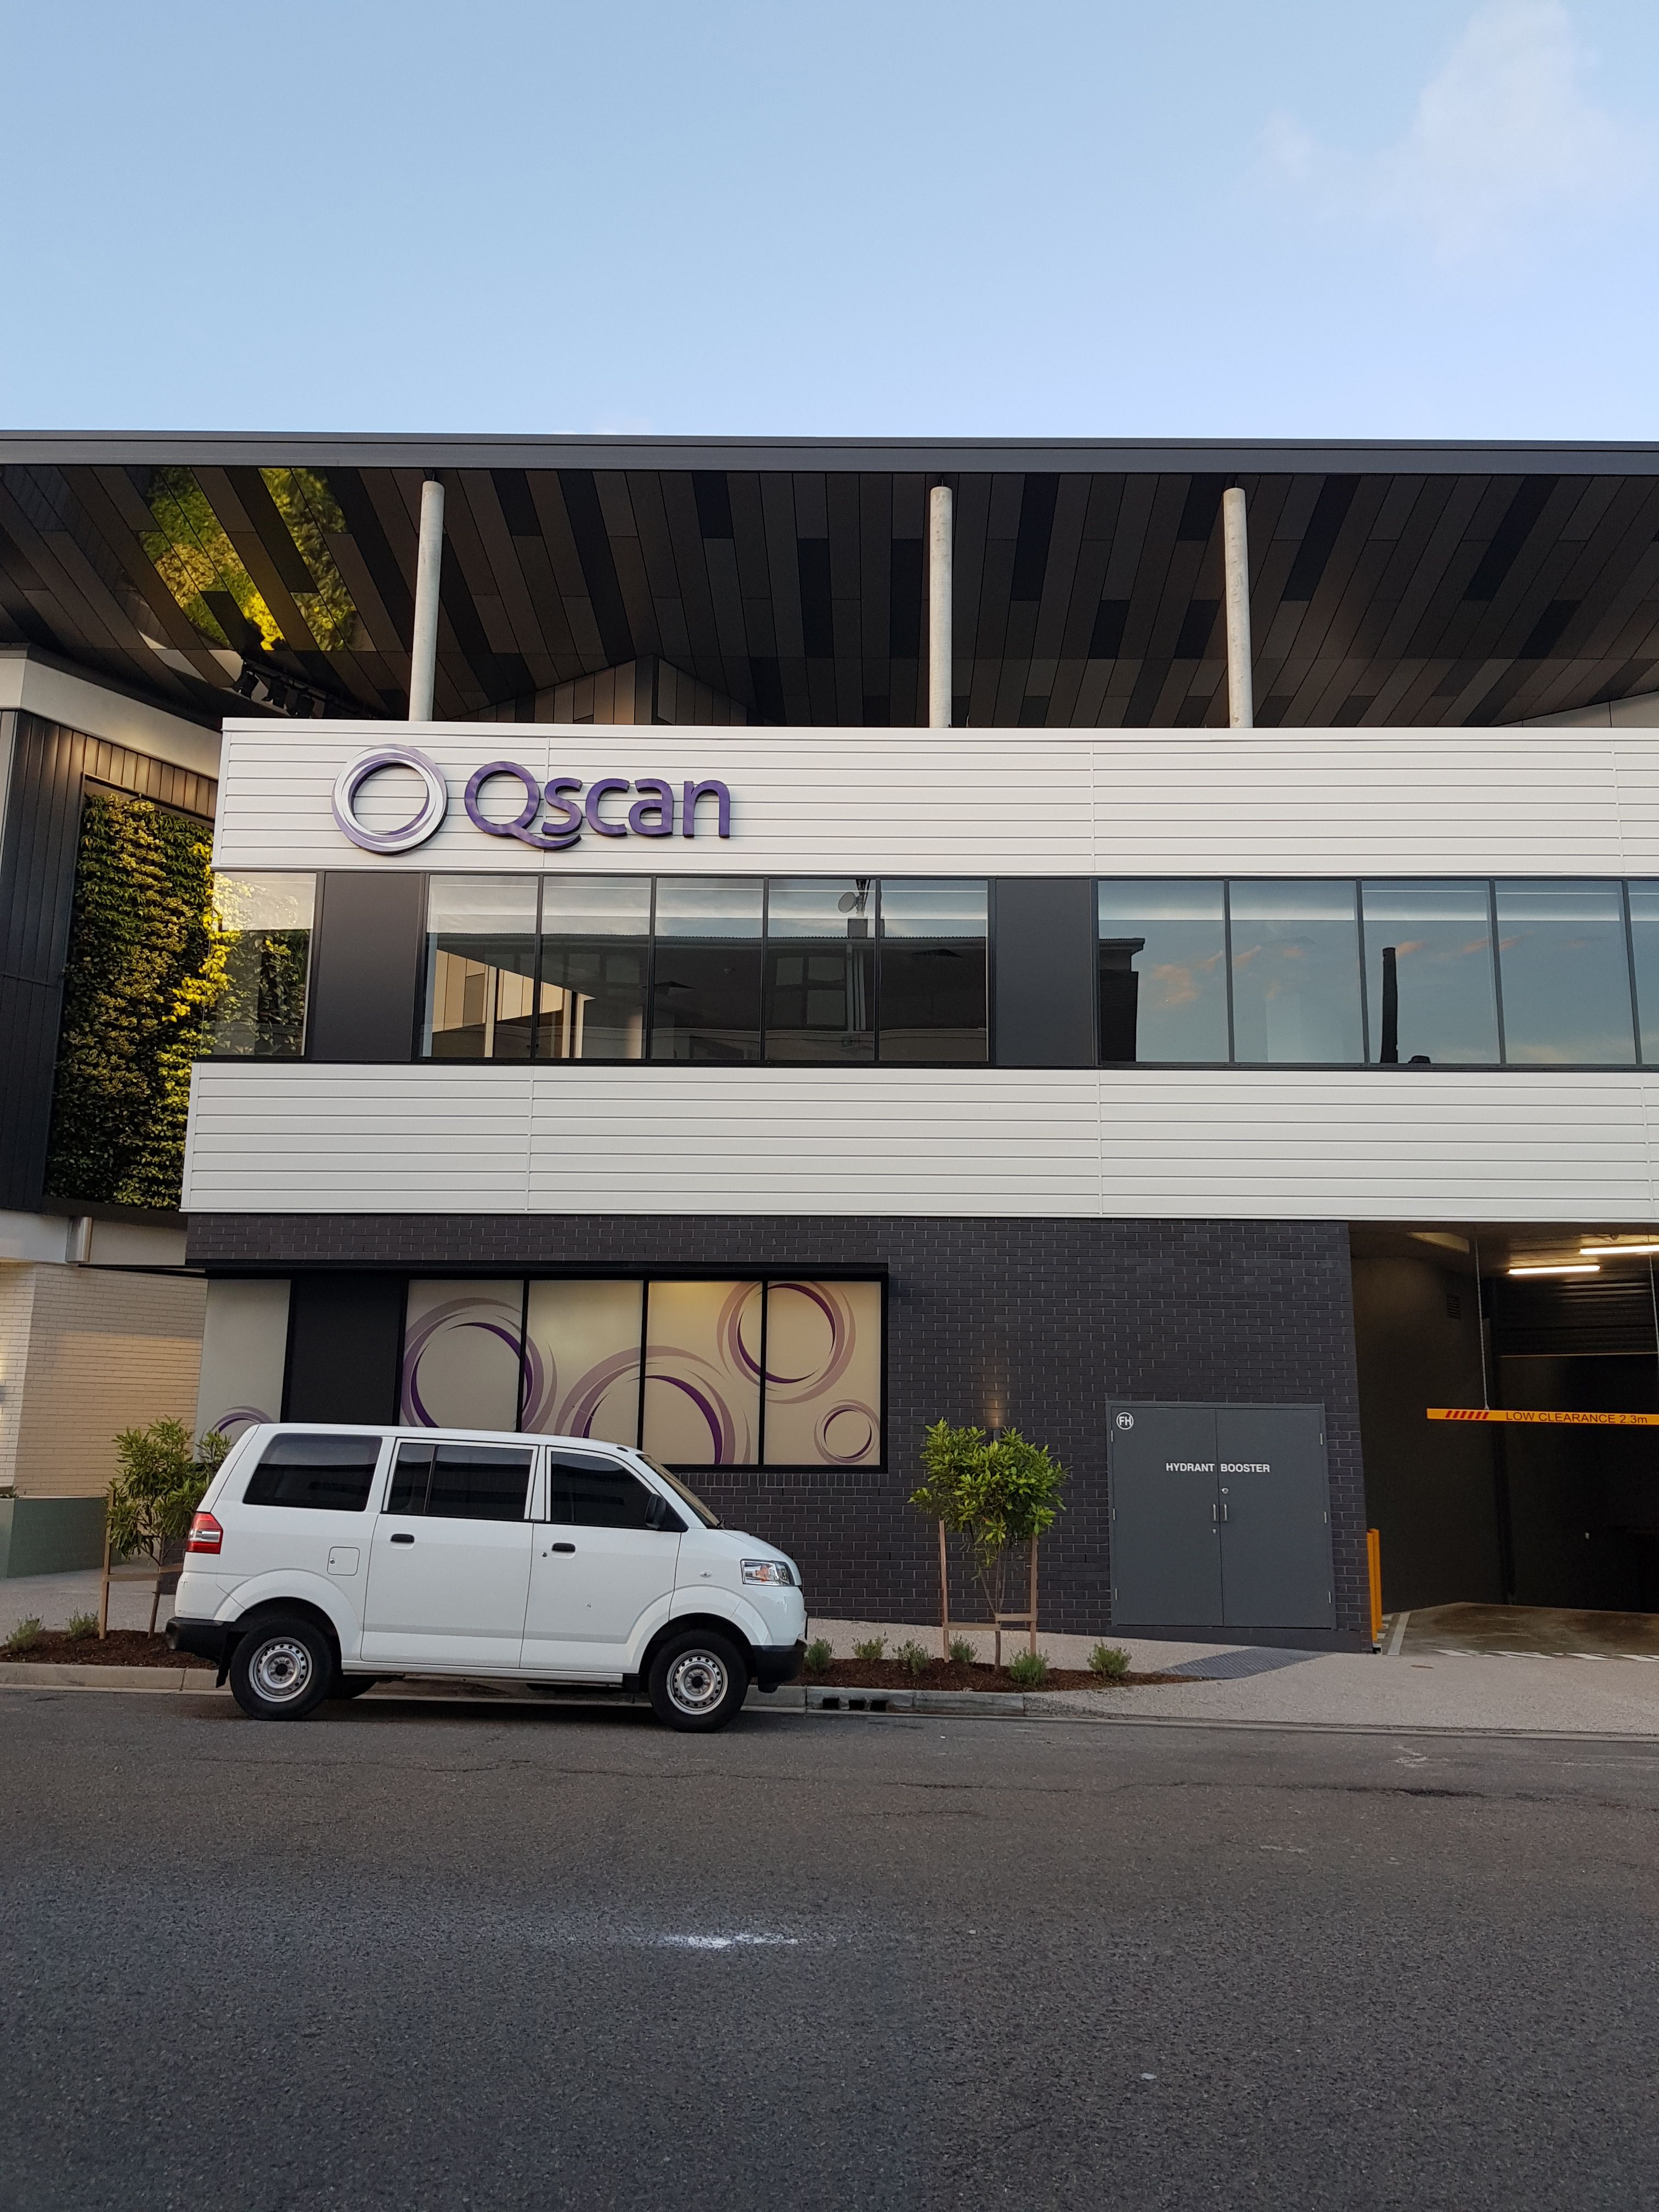 QScan Fabricated Letters